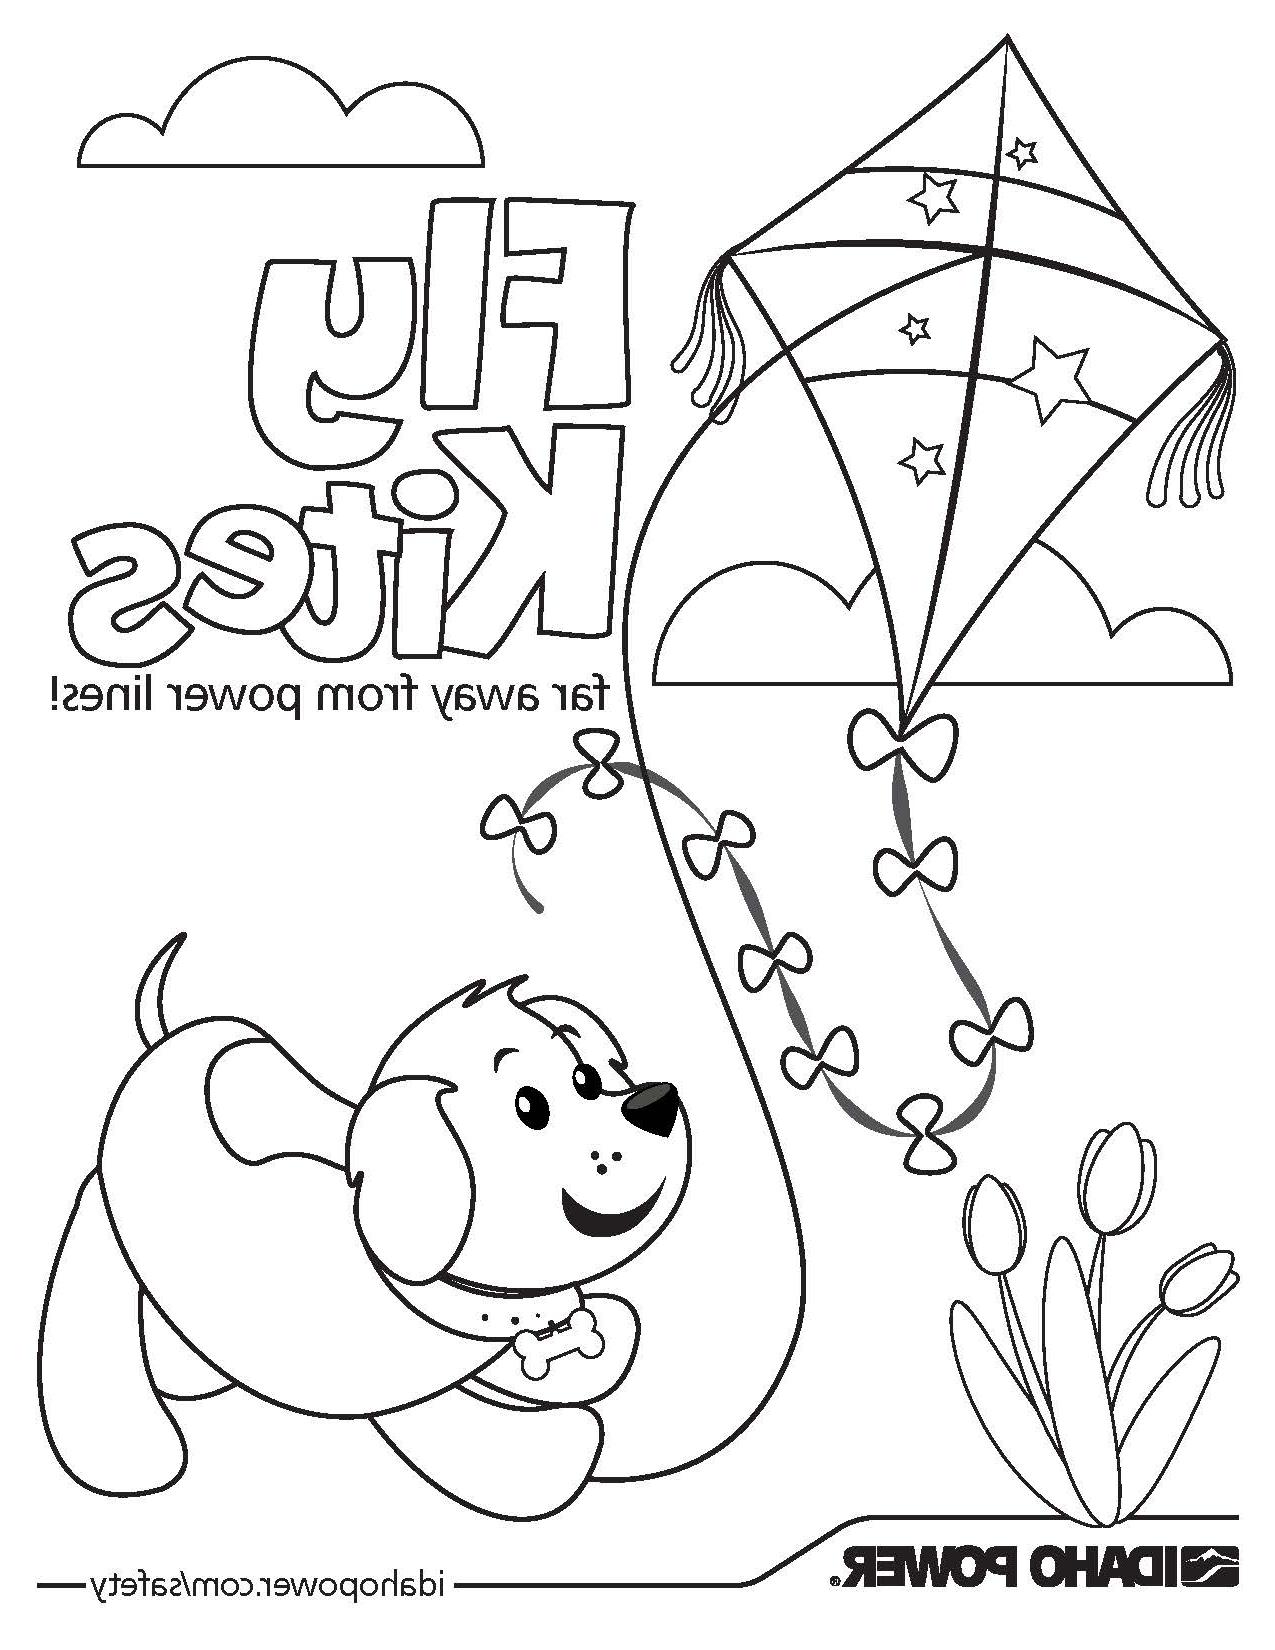 Image of dog and a kite saying "fly kites far away from powerlines"